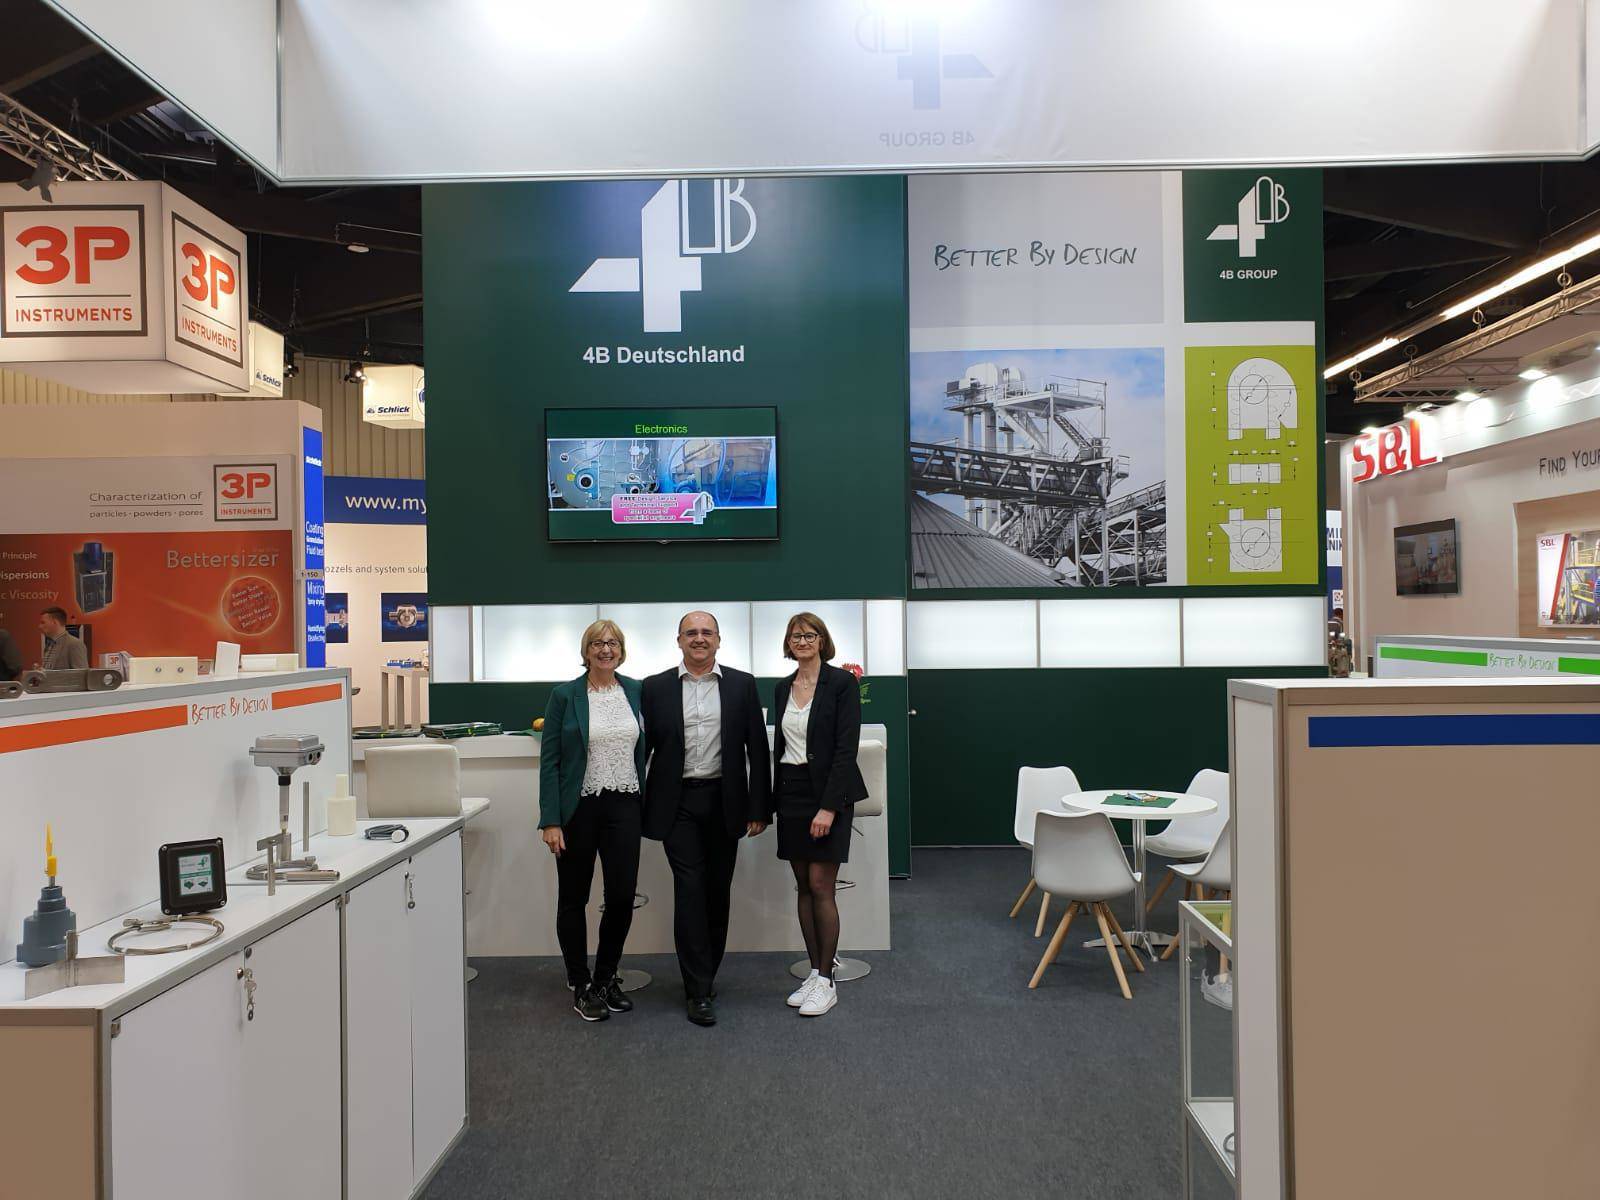 4B Deutschland at Powtech Conveying and hazard monitoring components